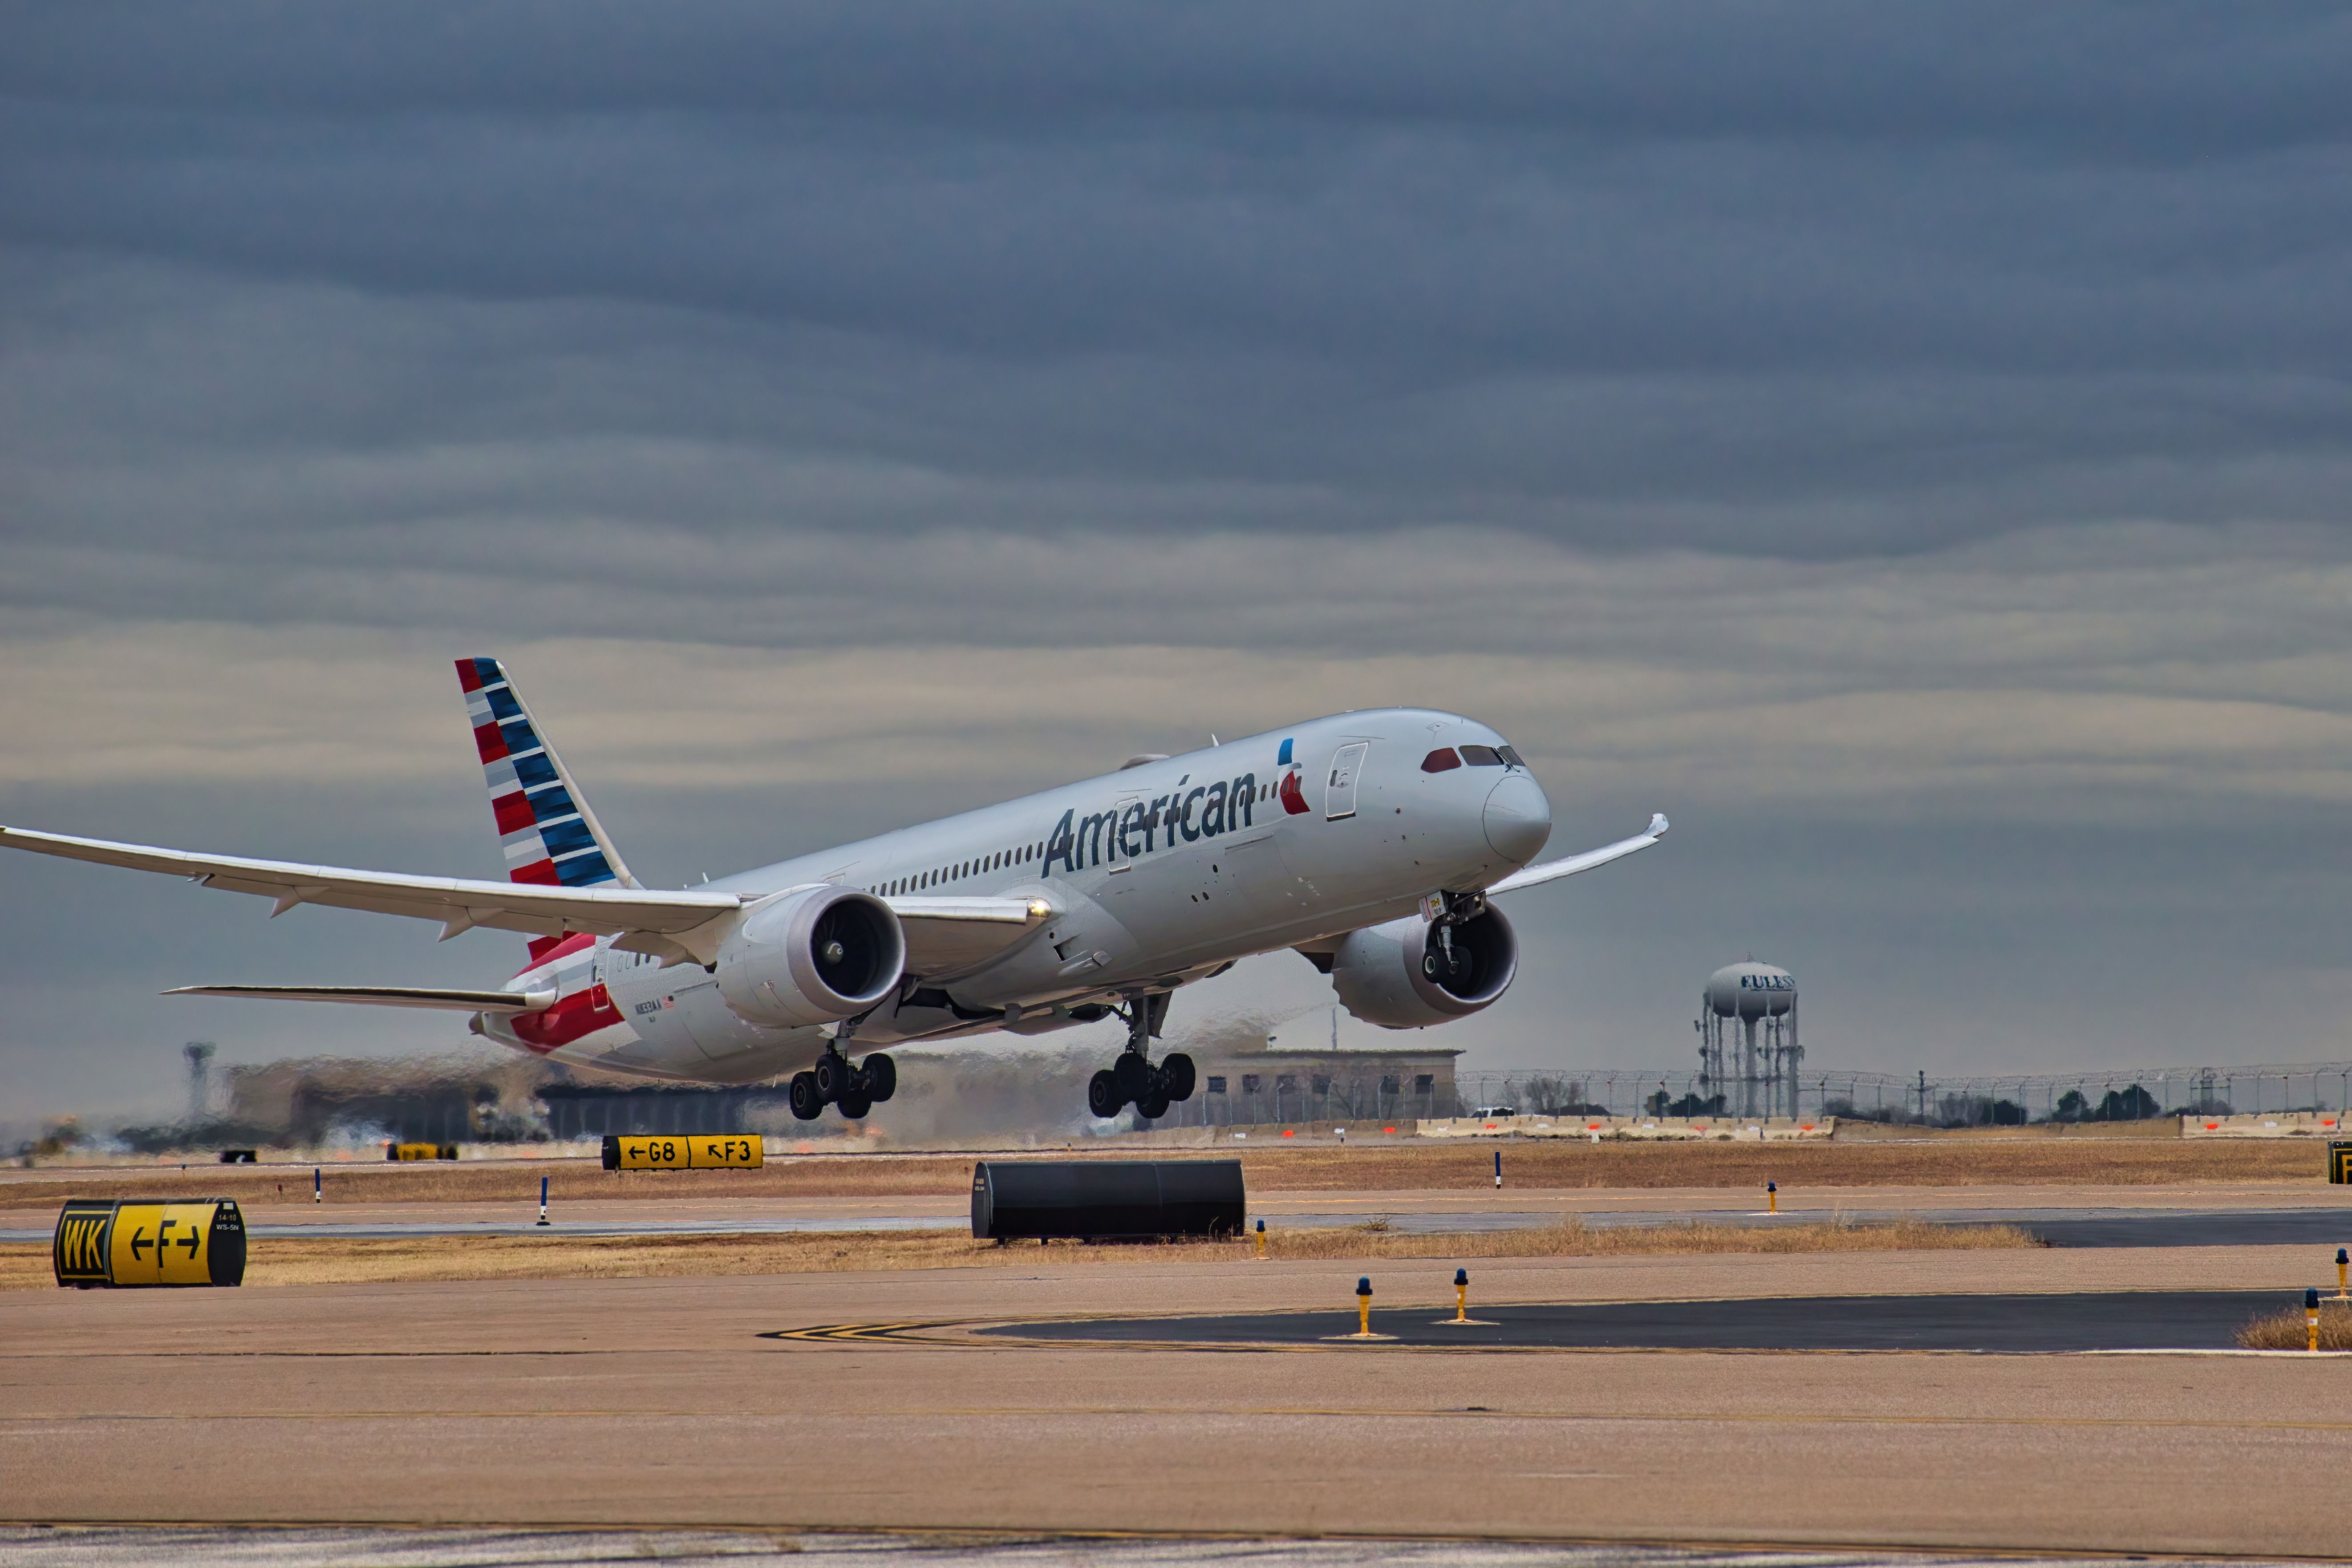 American Airlines Boeing 787-9 Dreamliner (N833AA) taking off from Dallas/Fort Worth International Airport.